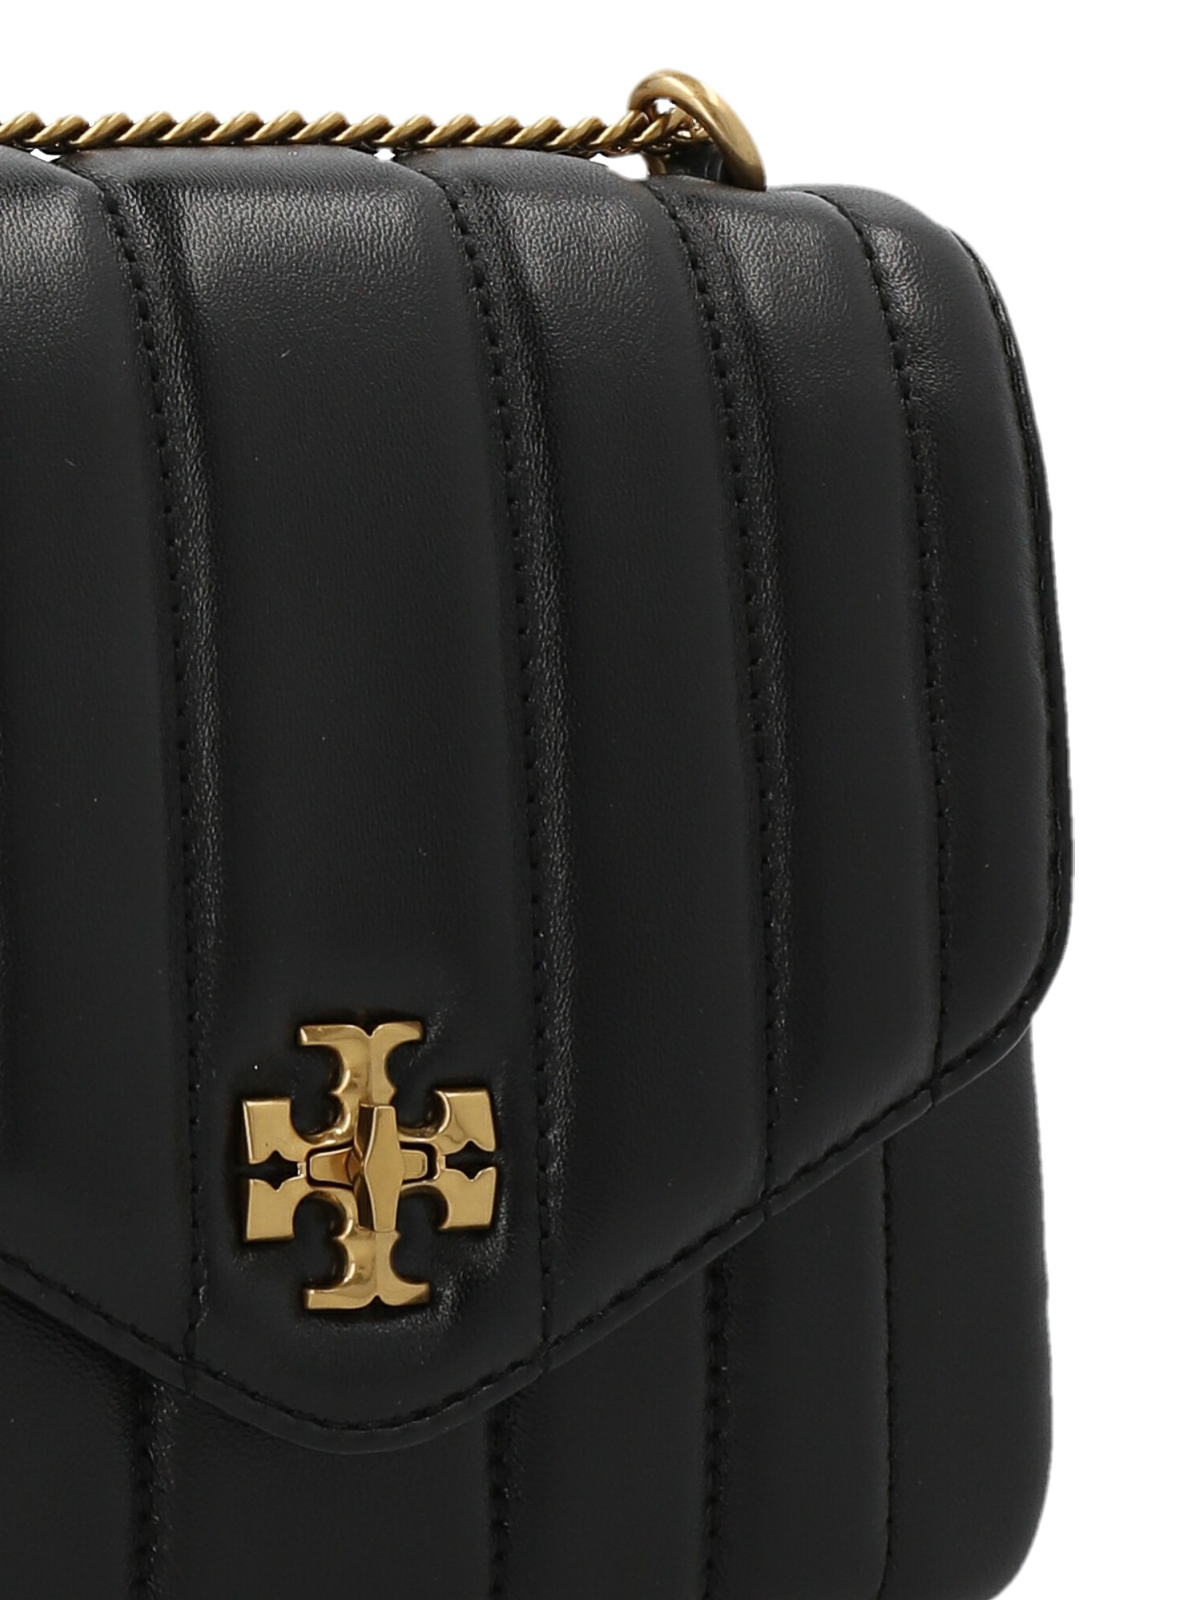 Tory Burch Kira Square Bag in Quilted Leather